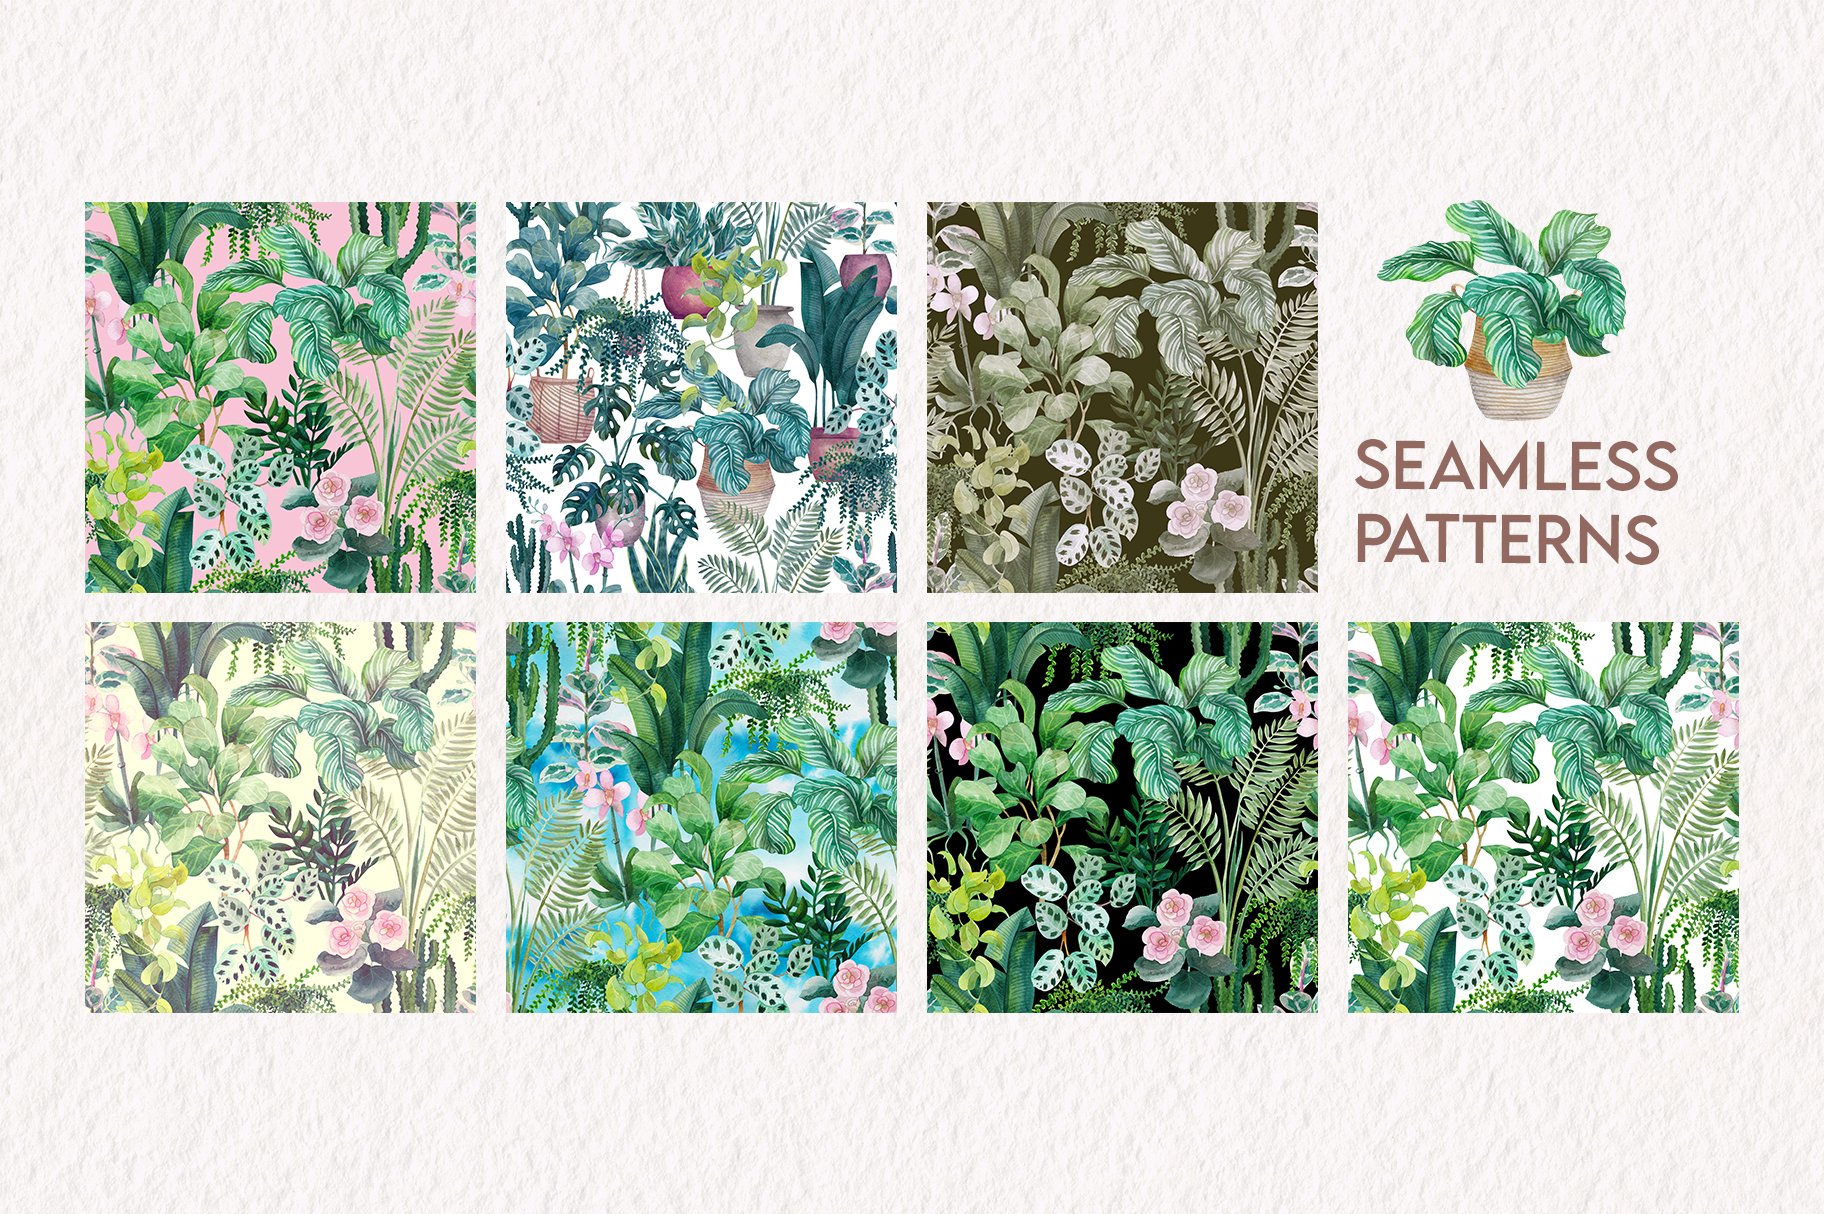 Set of four different patterns of plants.